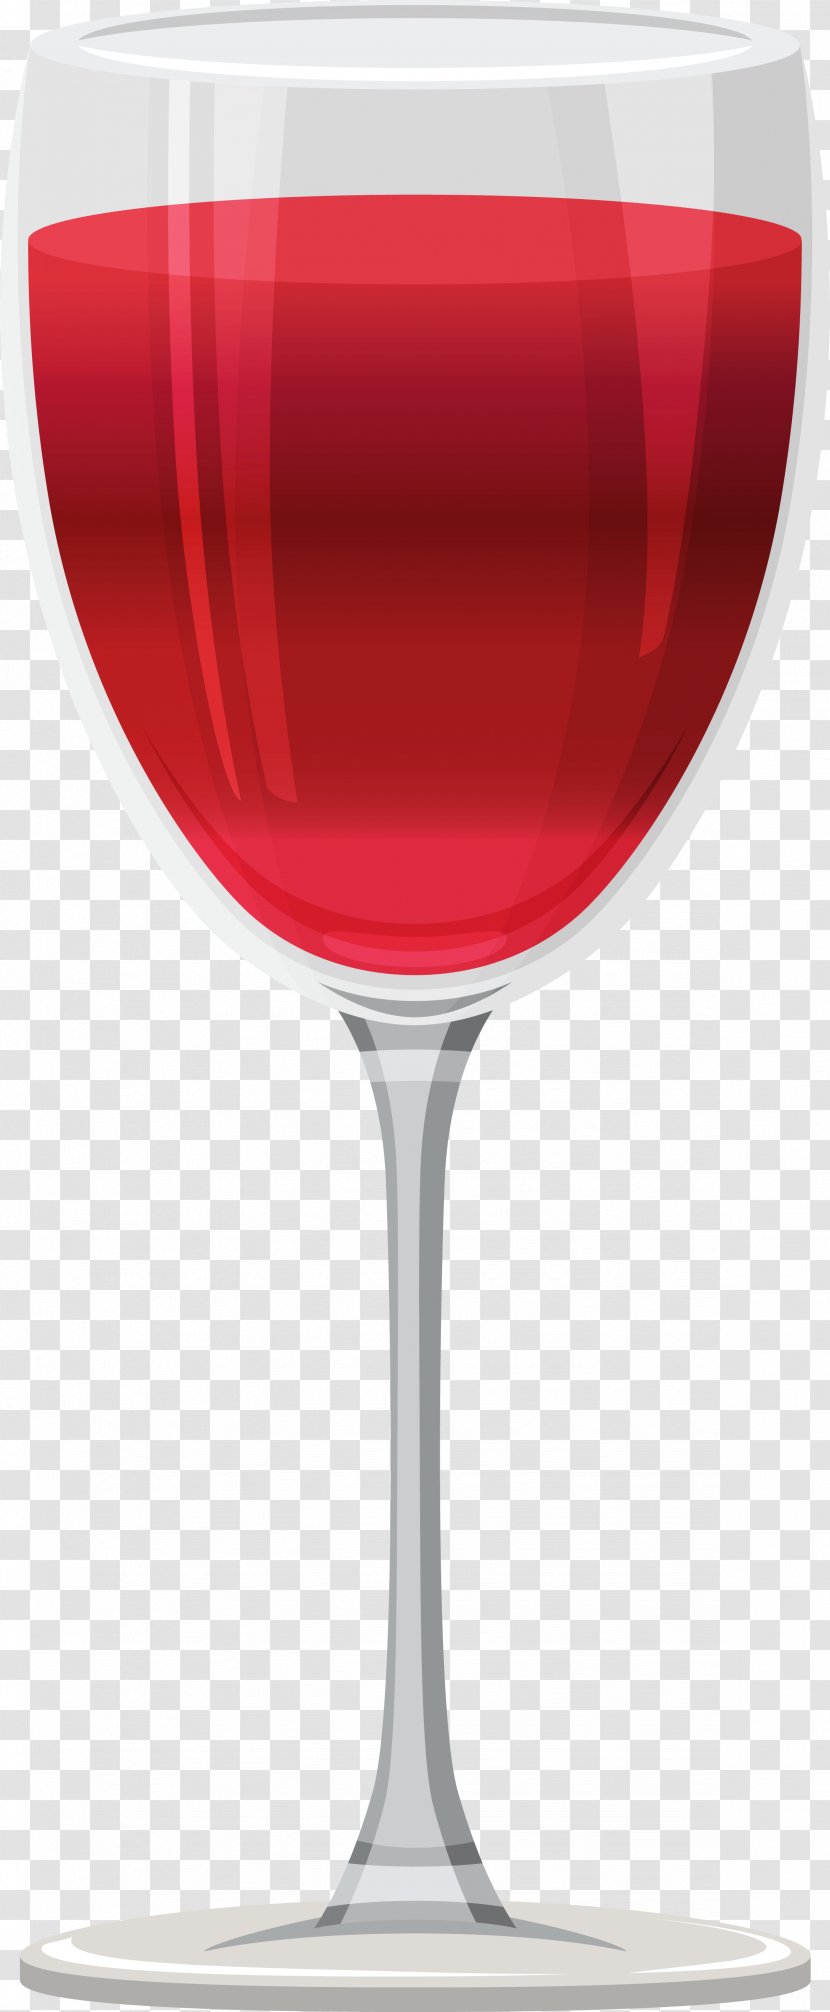 Wine Glass Cocktail - Red - Image Transparent PNG